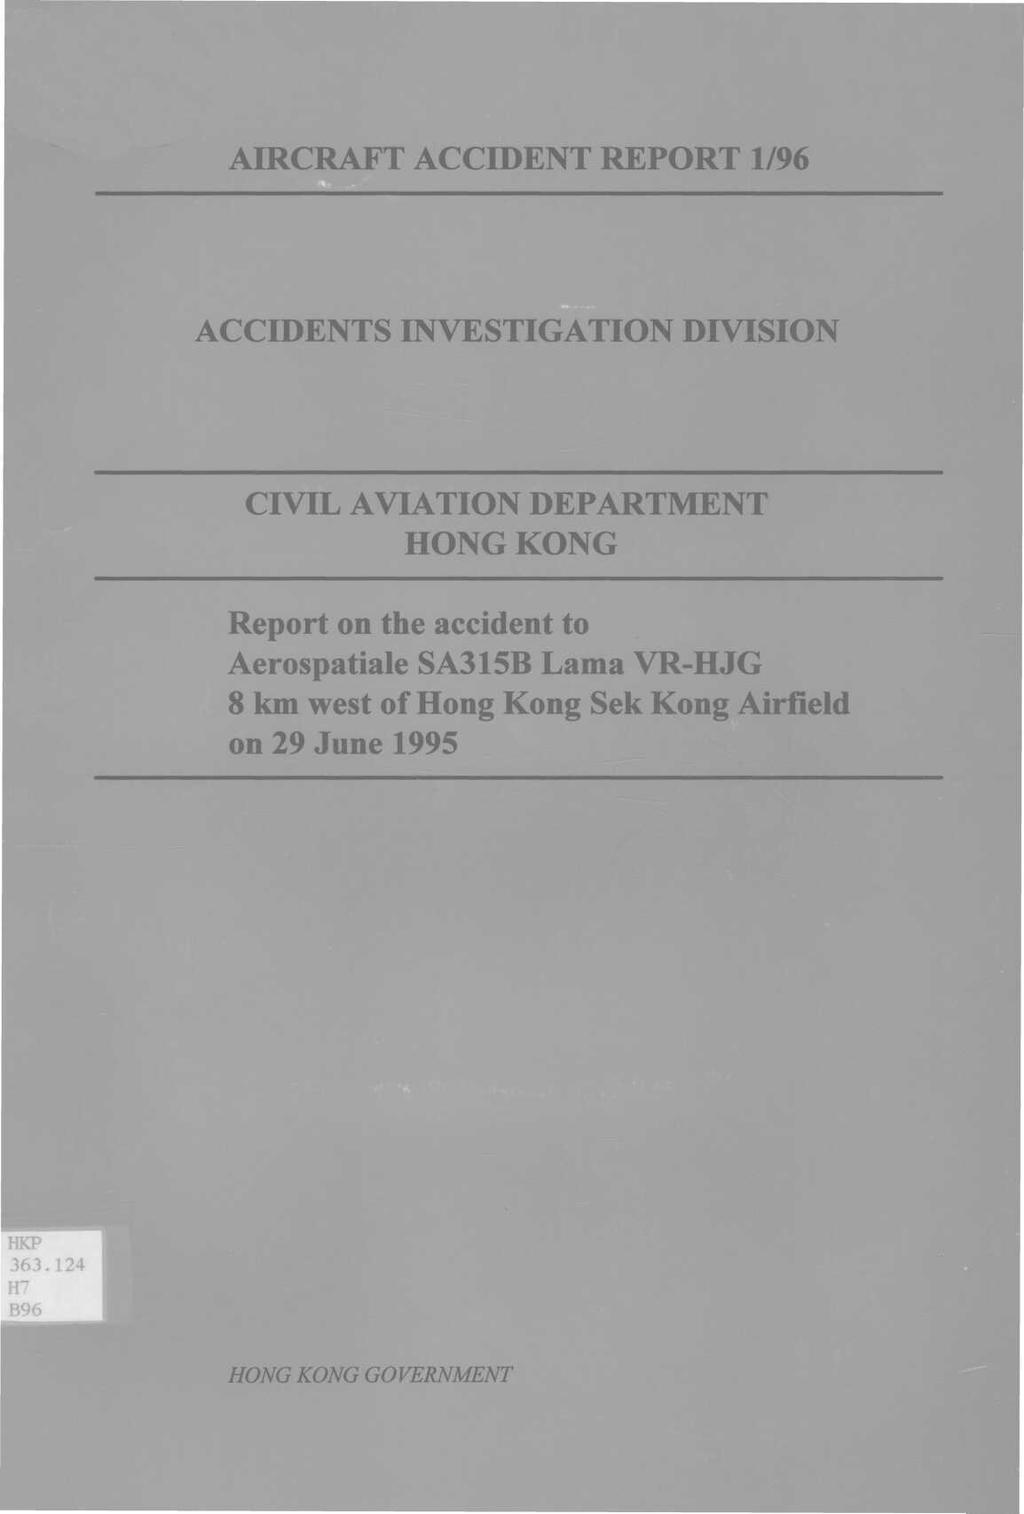 AIRCRAFT ACCIDENT REPORT 1/96 ACCIDENTS INVESTIGATION DIVISION CIVIL AVIATION DEPARTMENT HONG KONG Report on the accident to